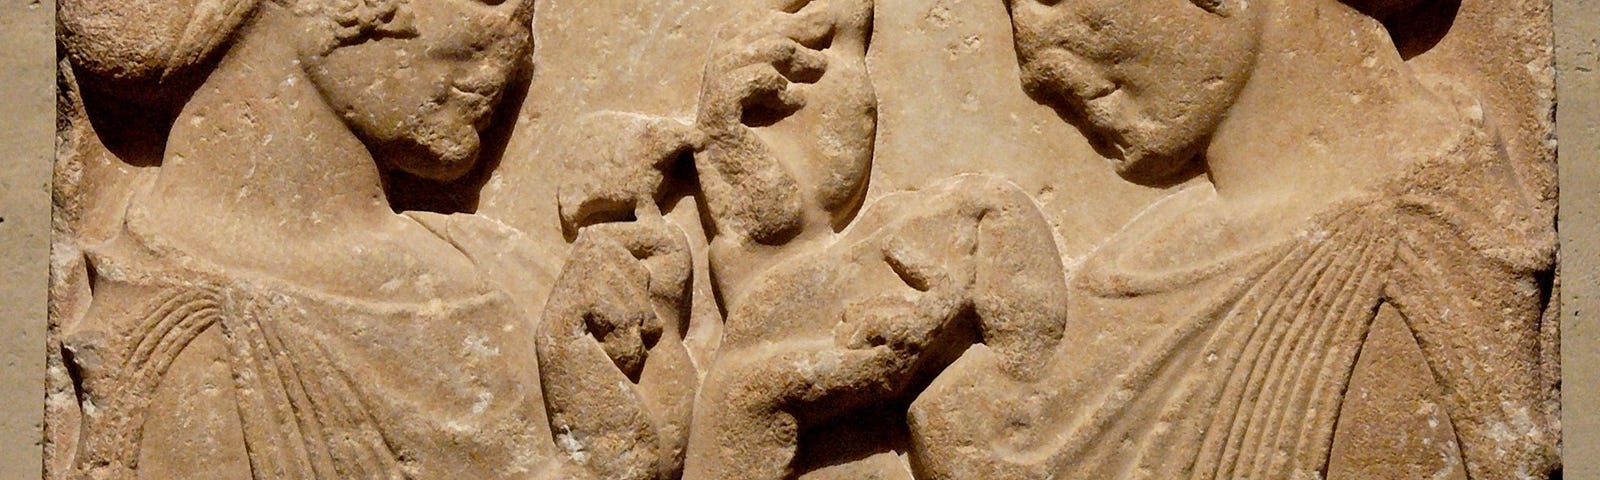 Two women carved out in stone